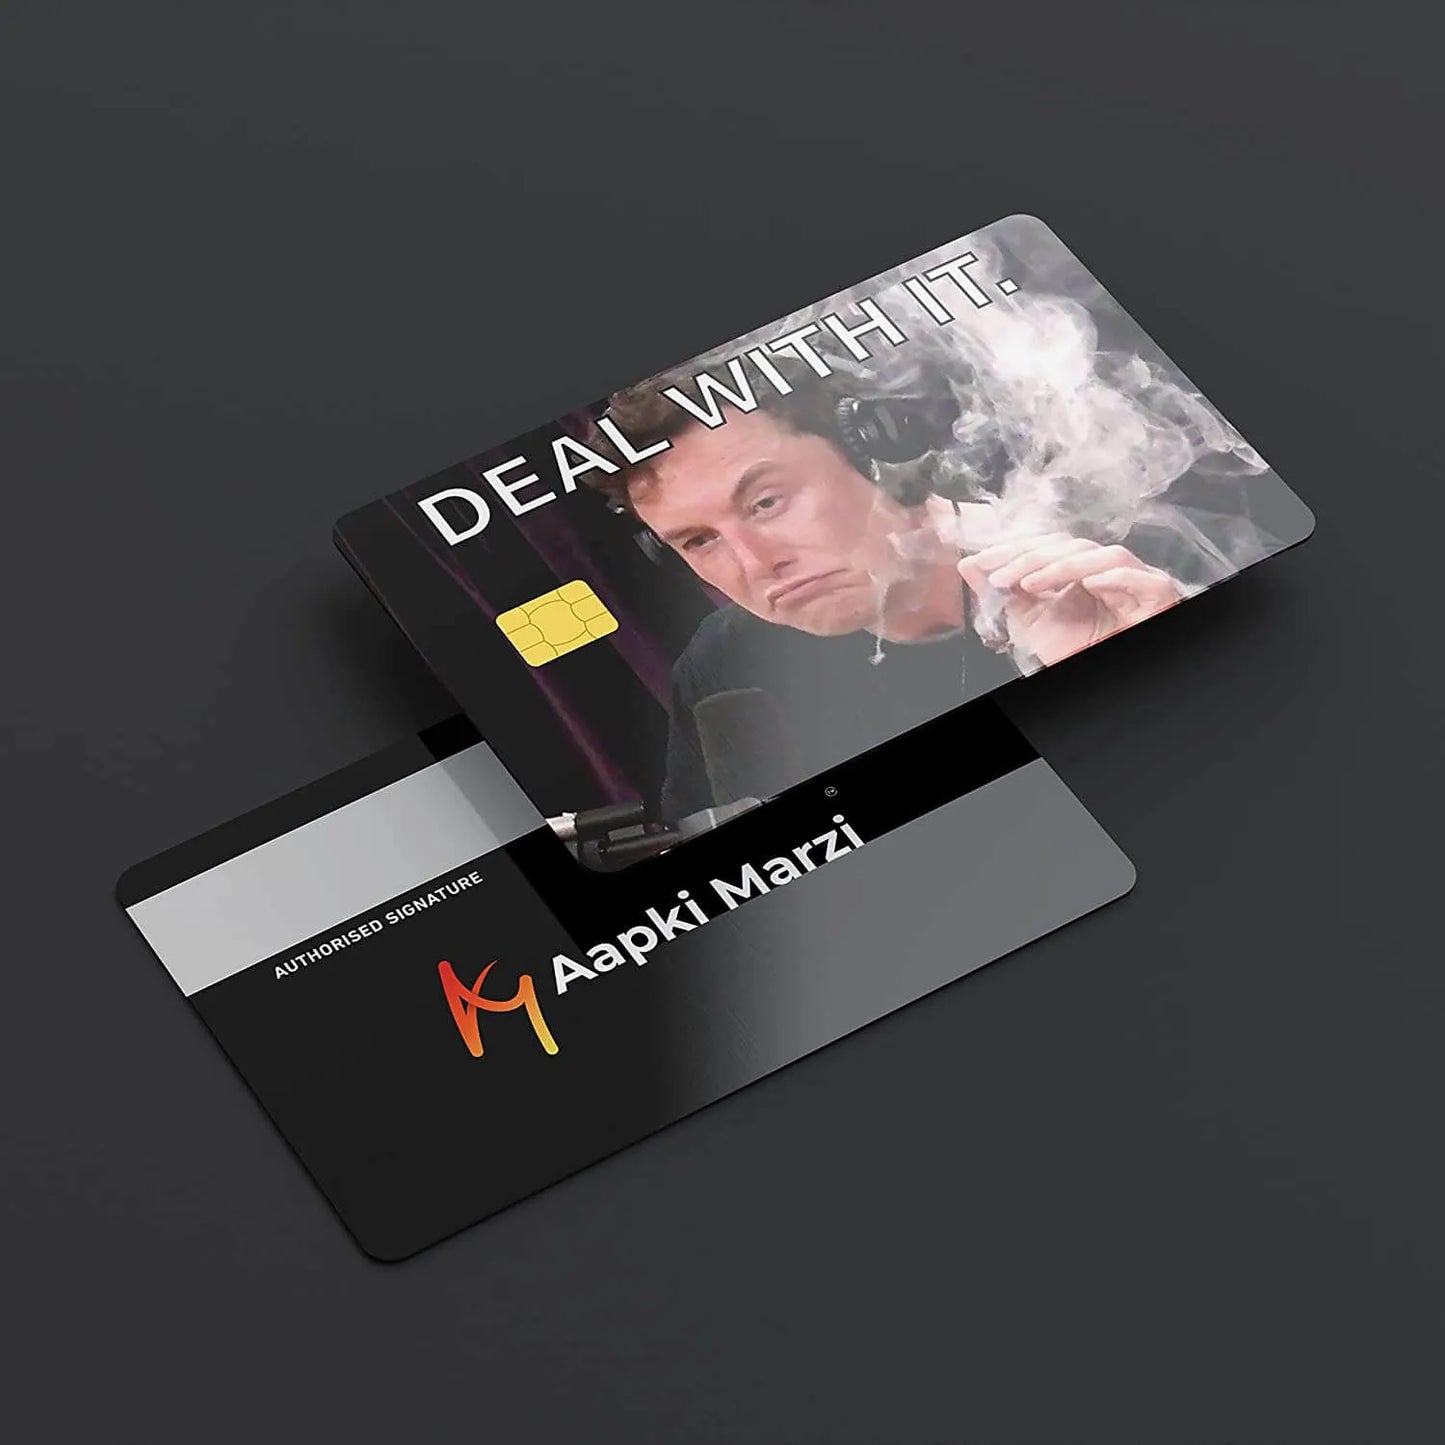 Deal with It credit card skins